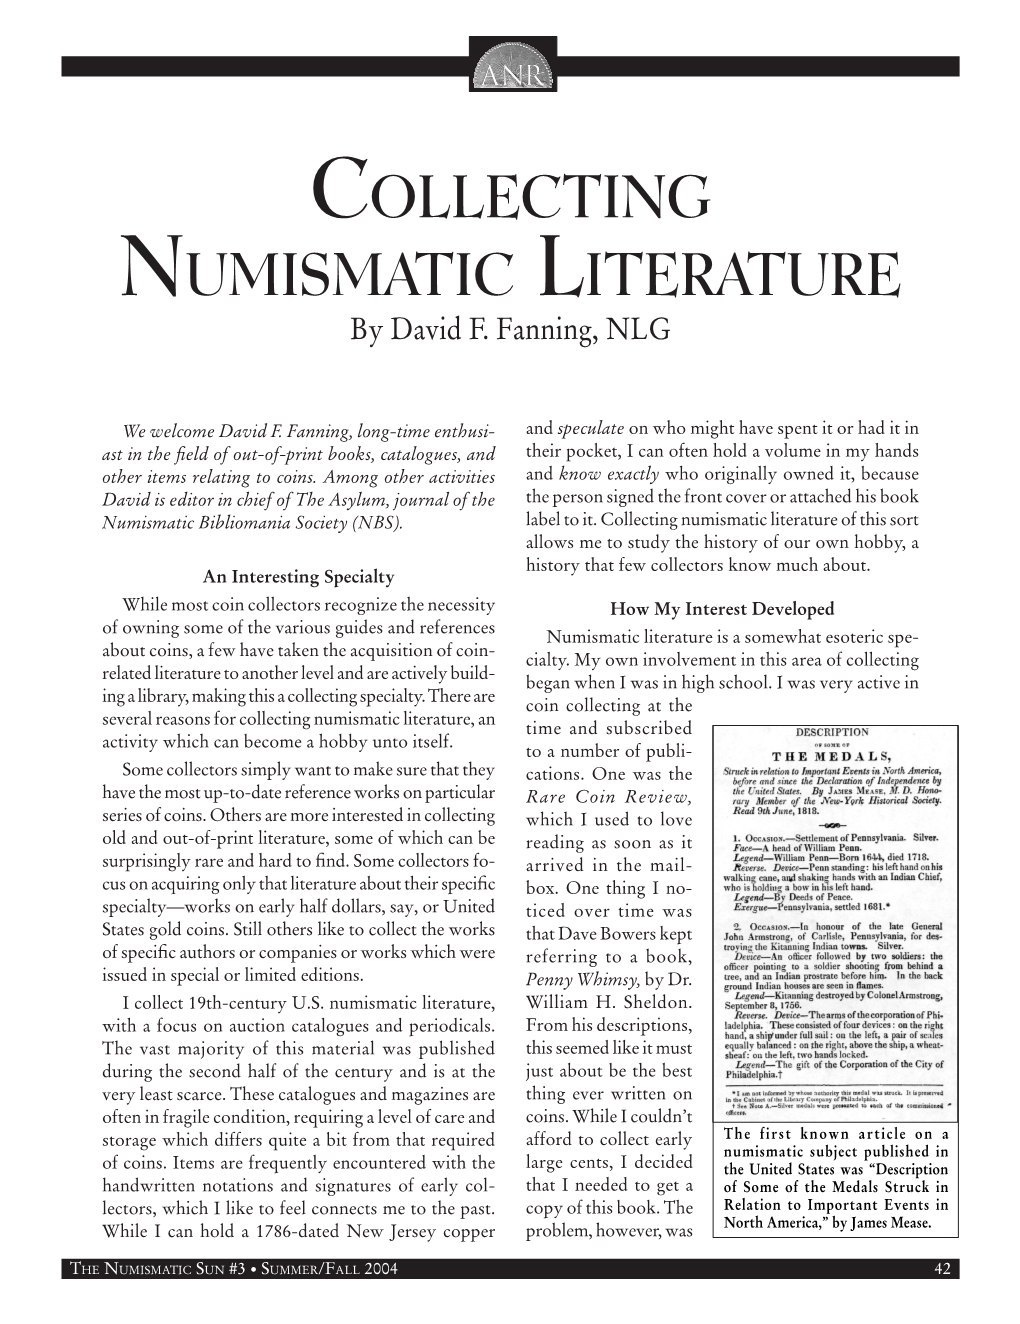 Collecting Numismatic Literature by David F